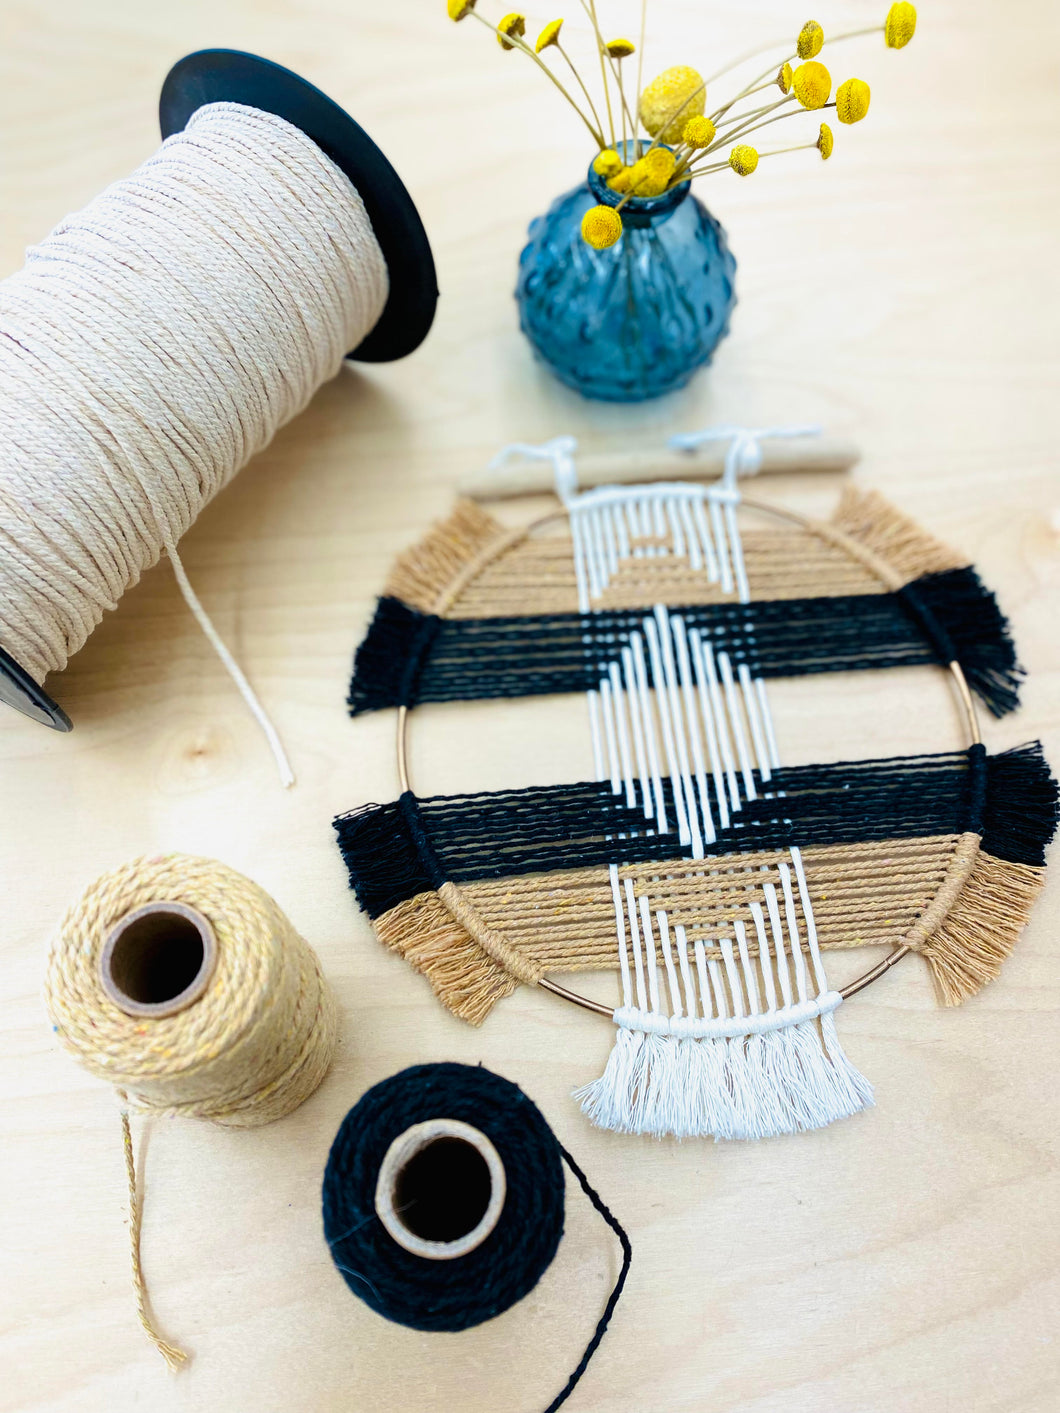 JUN 17th IN PERSON - Macra-Weaving Workshop with Denise Ambrosi